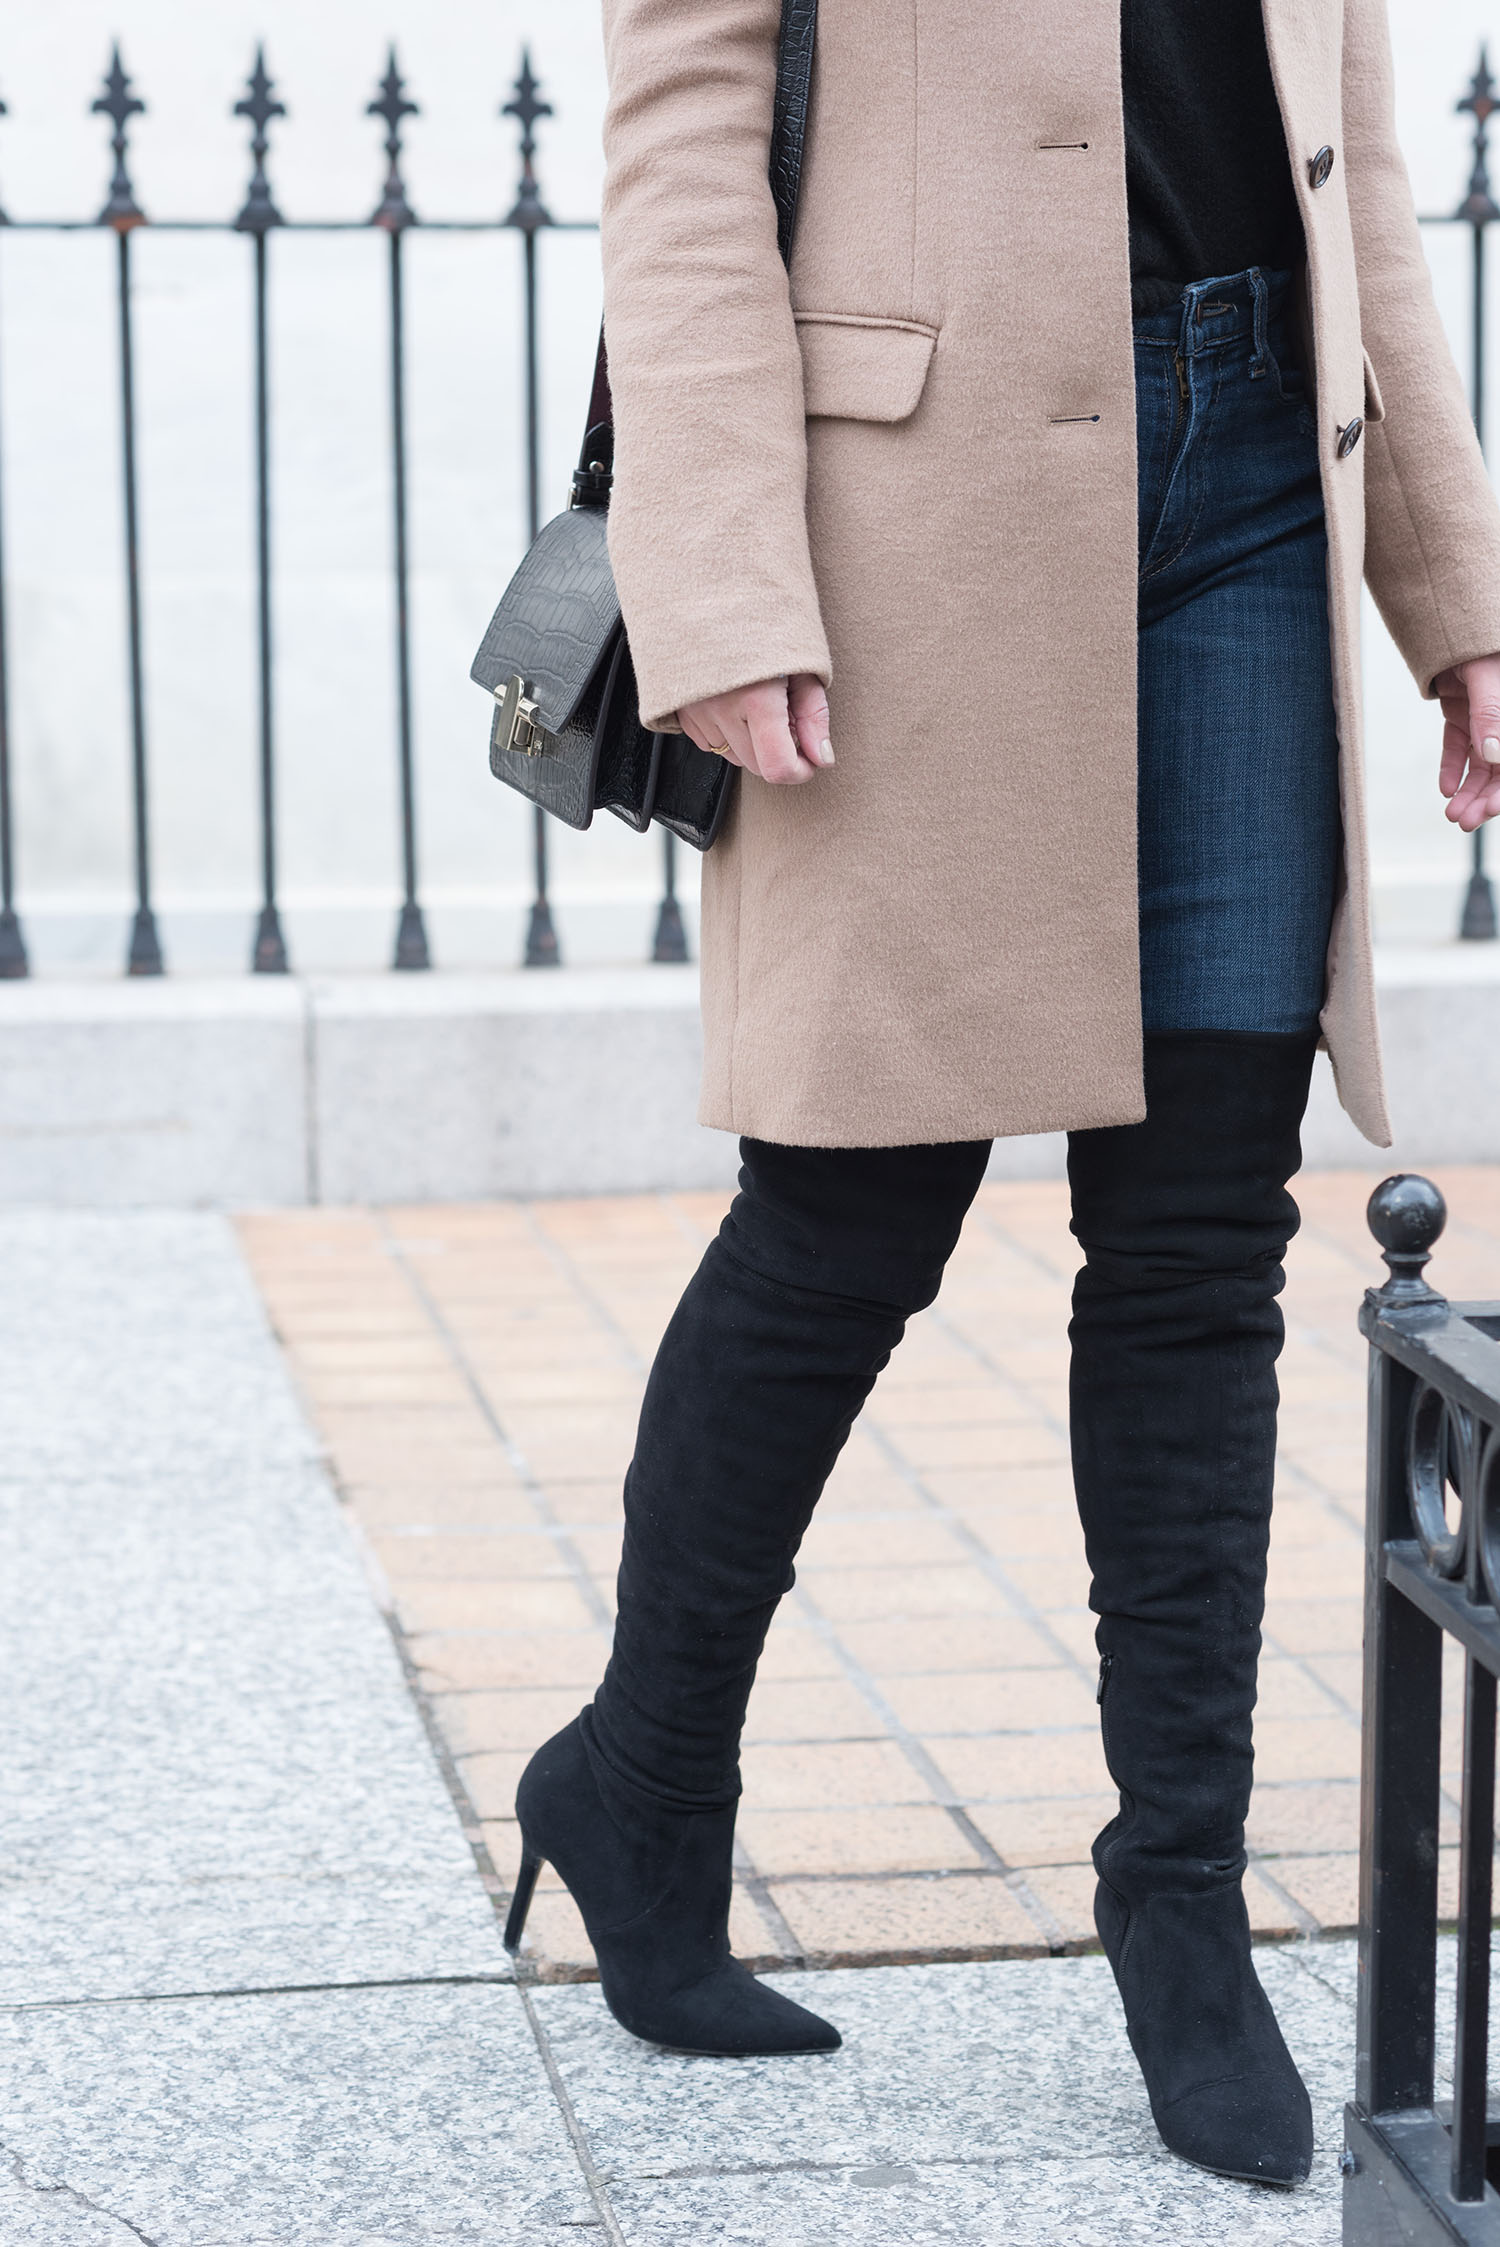 Outfit details on Canadian fashion blogger Cee Fardoe of Coco & Vera, including Aldo OTK boots and Yoga Jeans skinny jeans